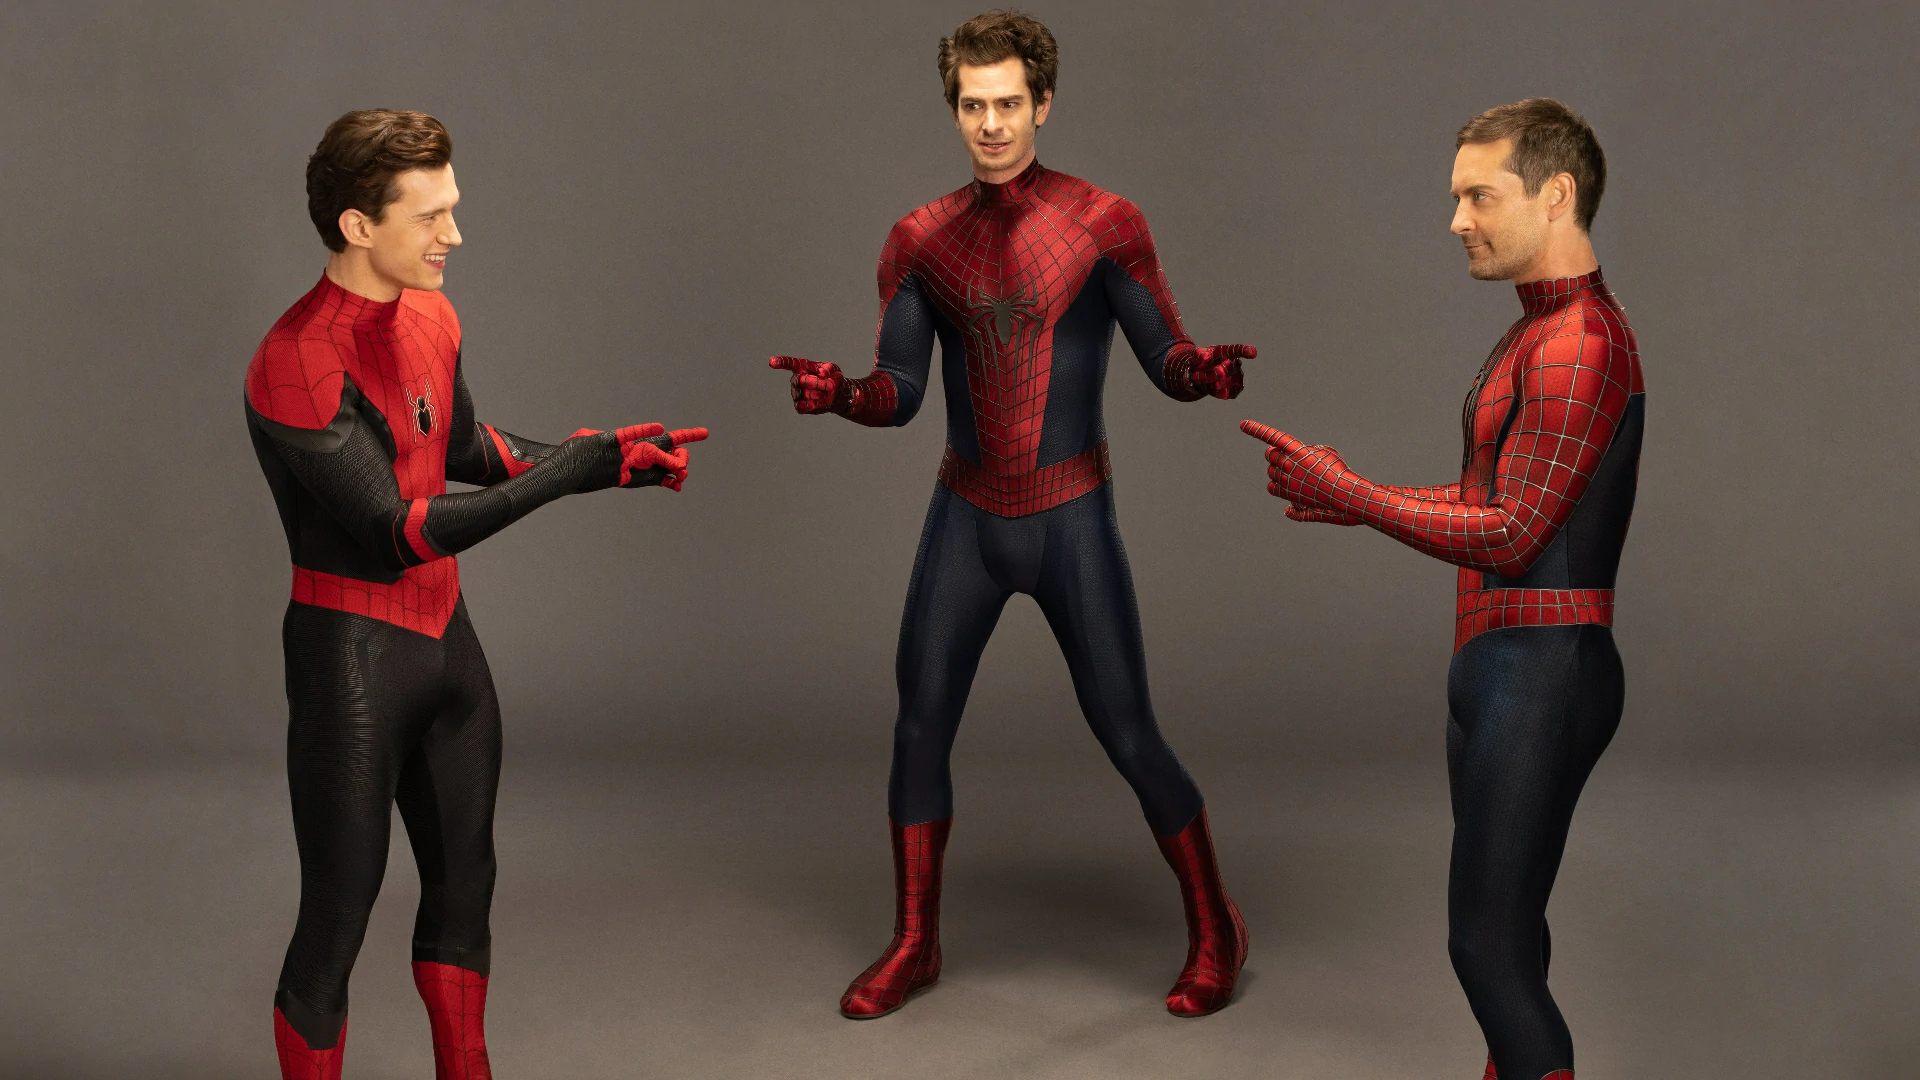 Actors Recreating the Iconic Spiderman-Pointing-Fingers